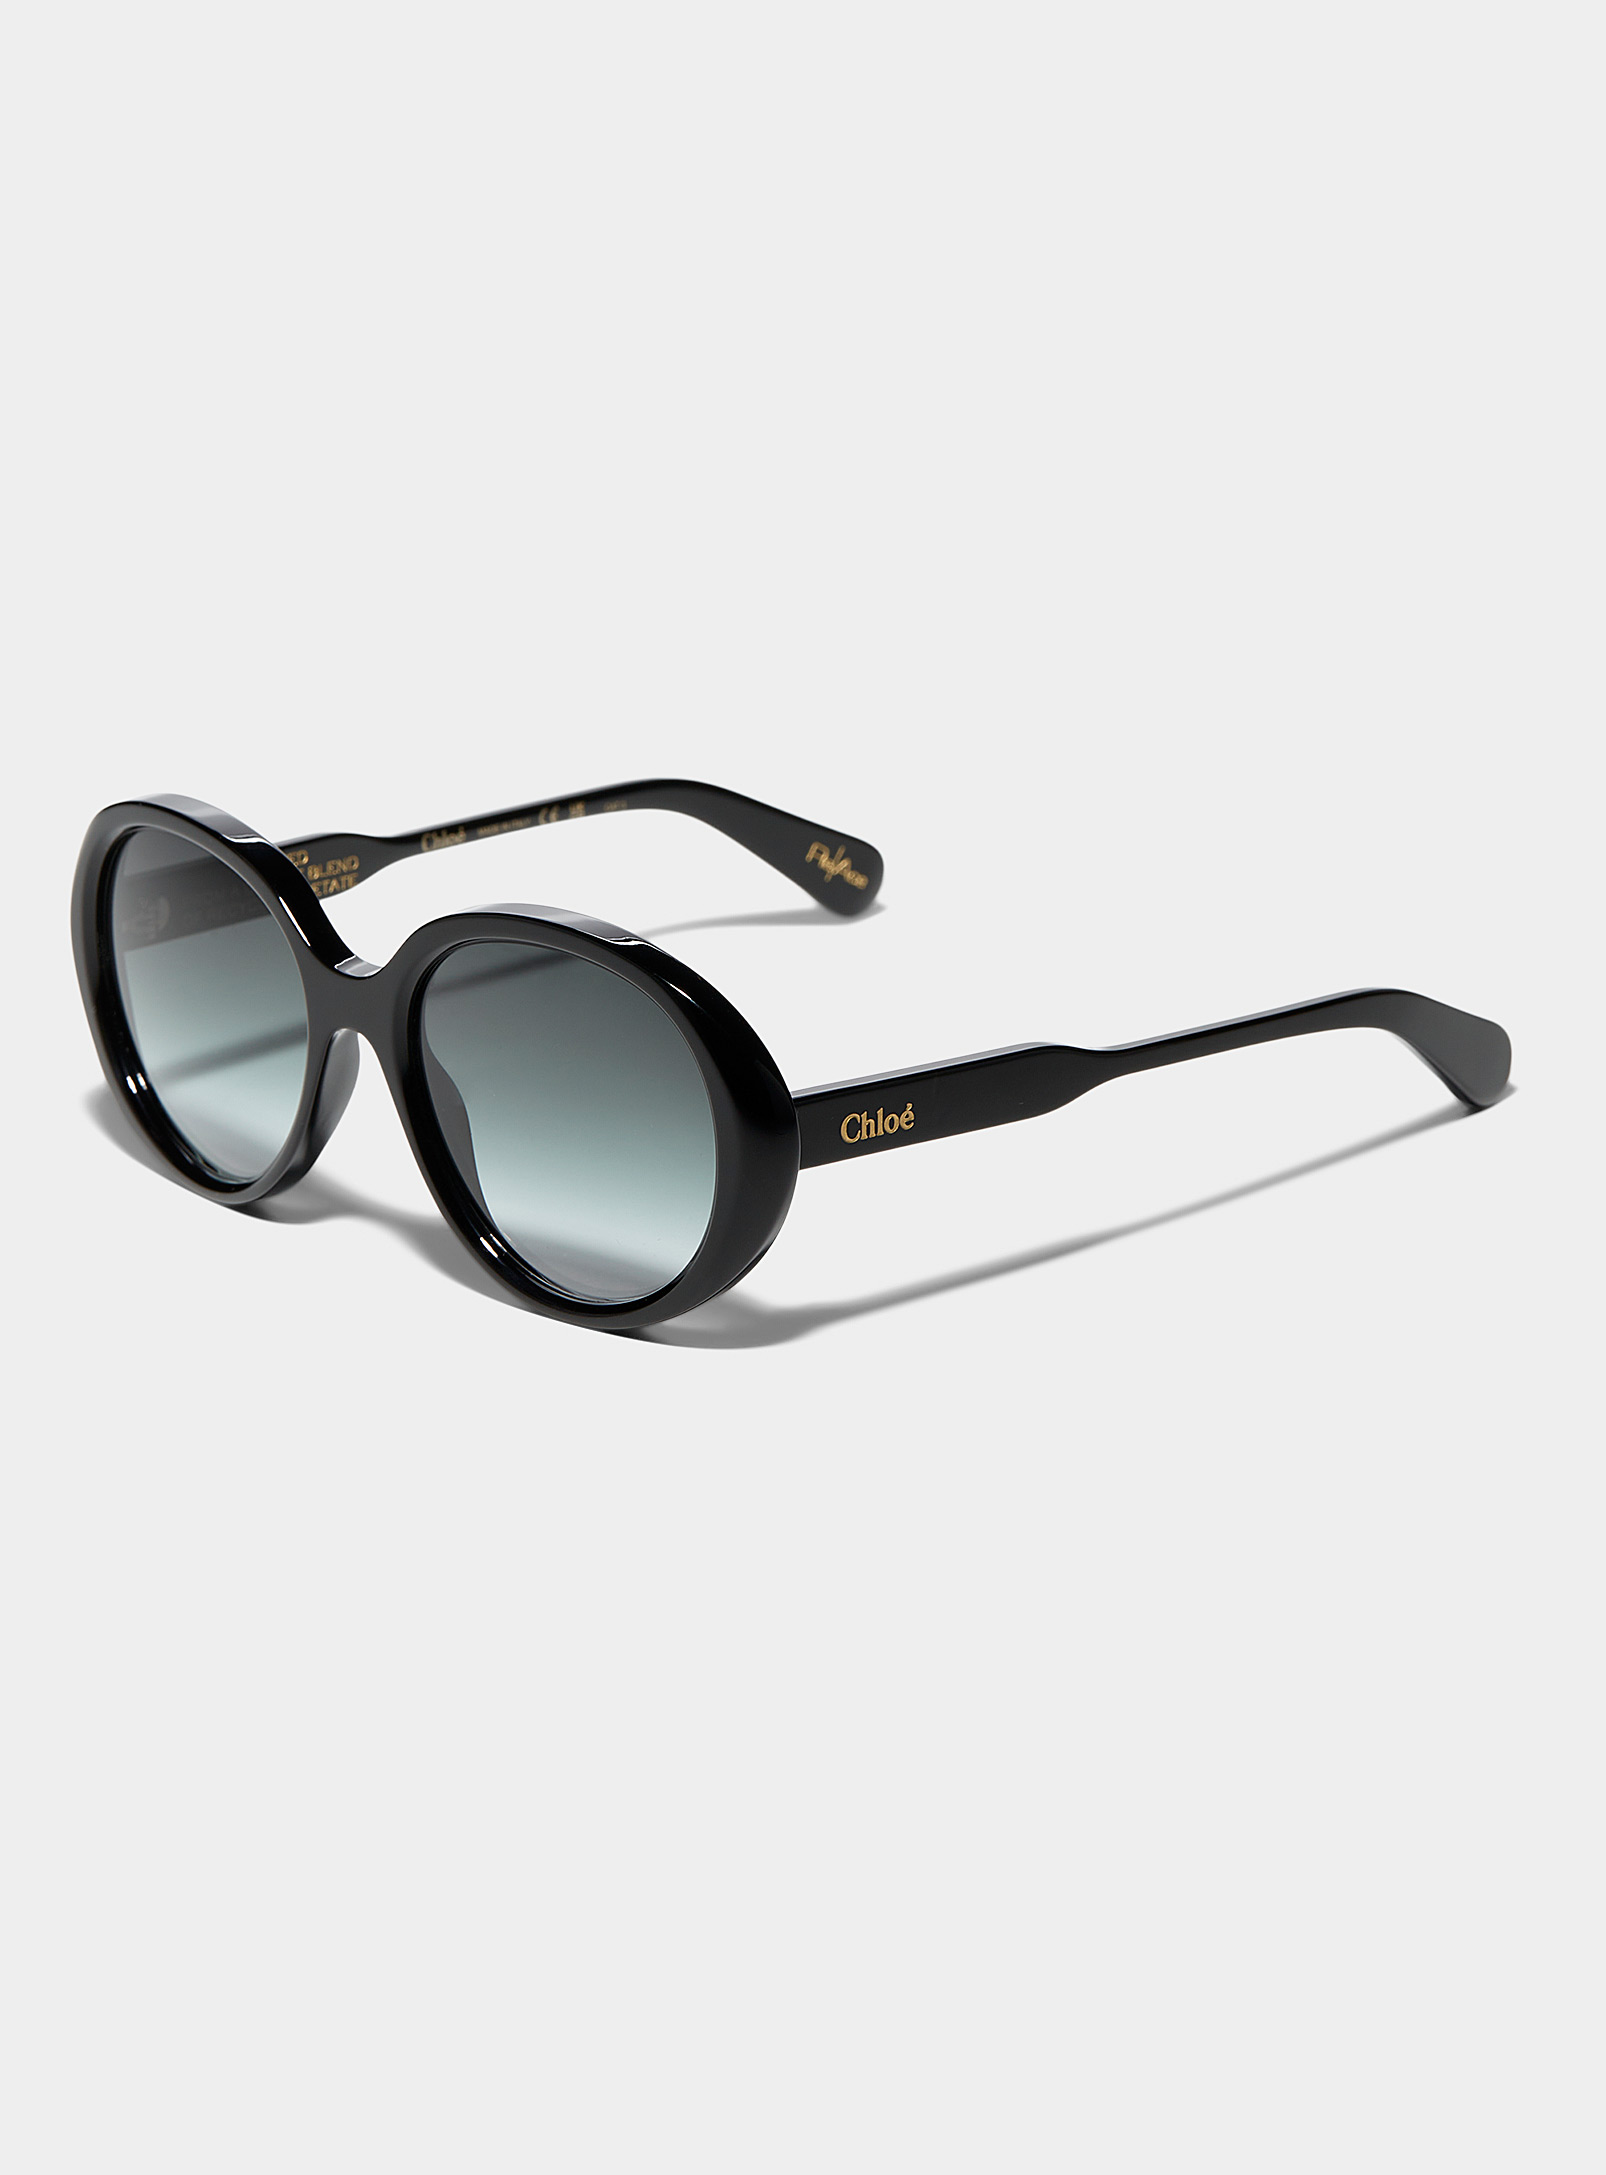 Chloé Gayia Round Sunglasses In Brown